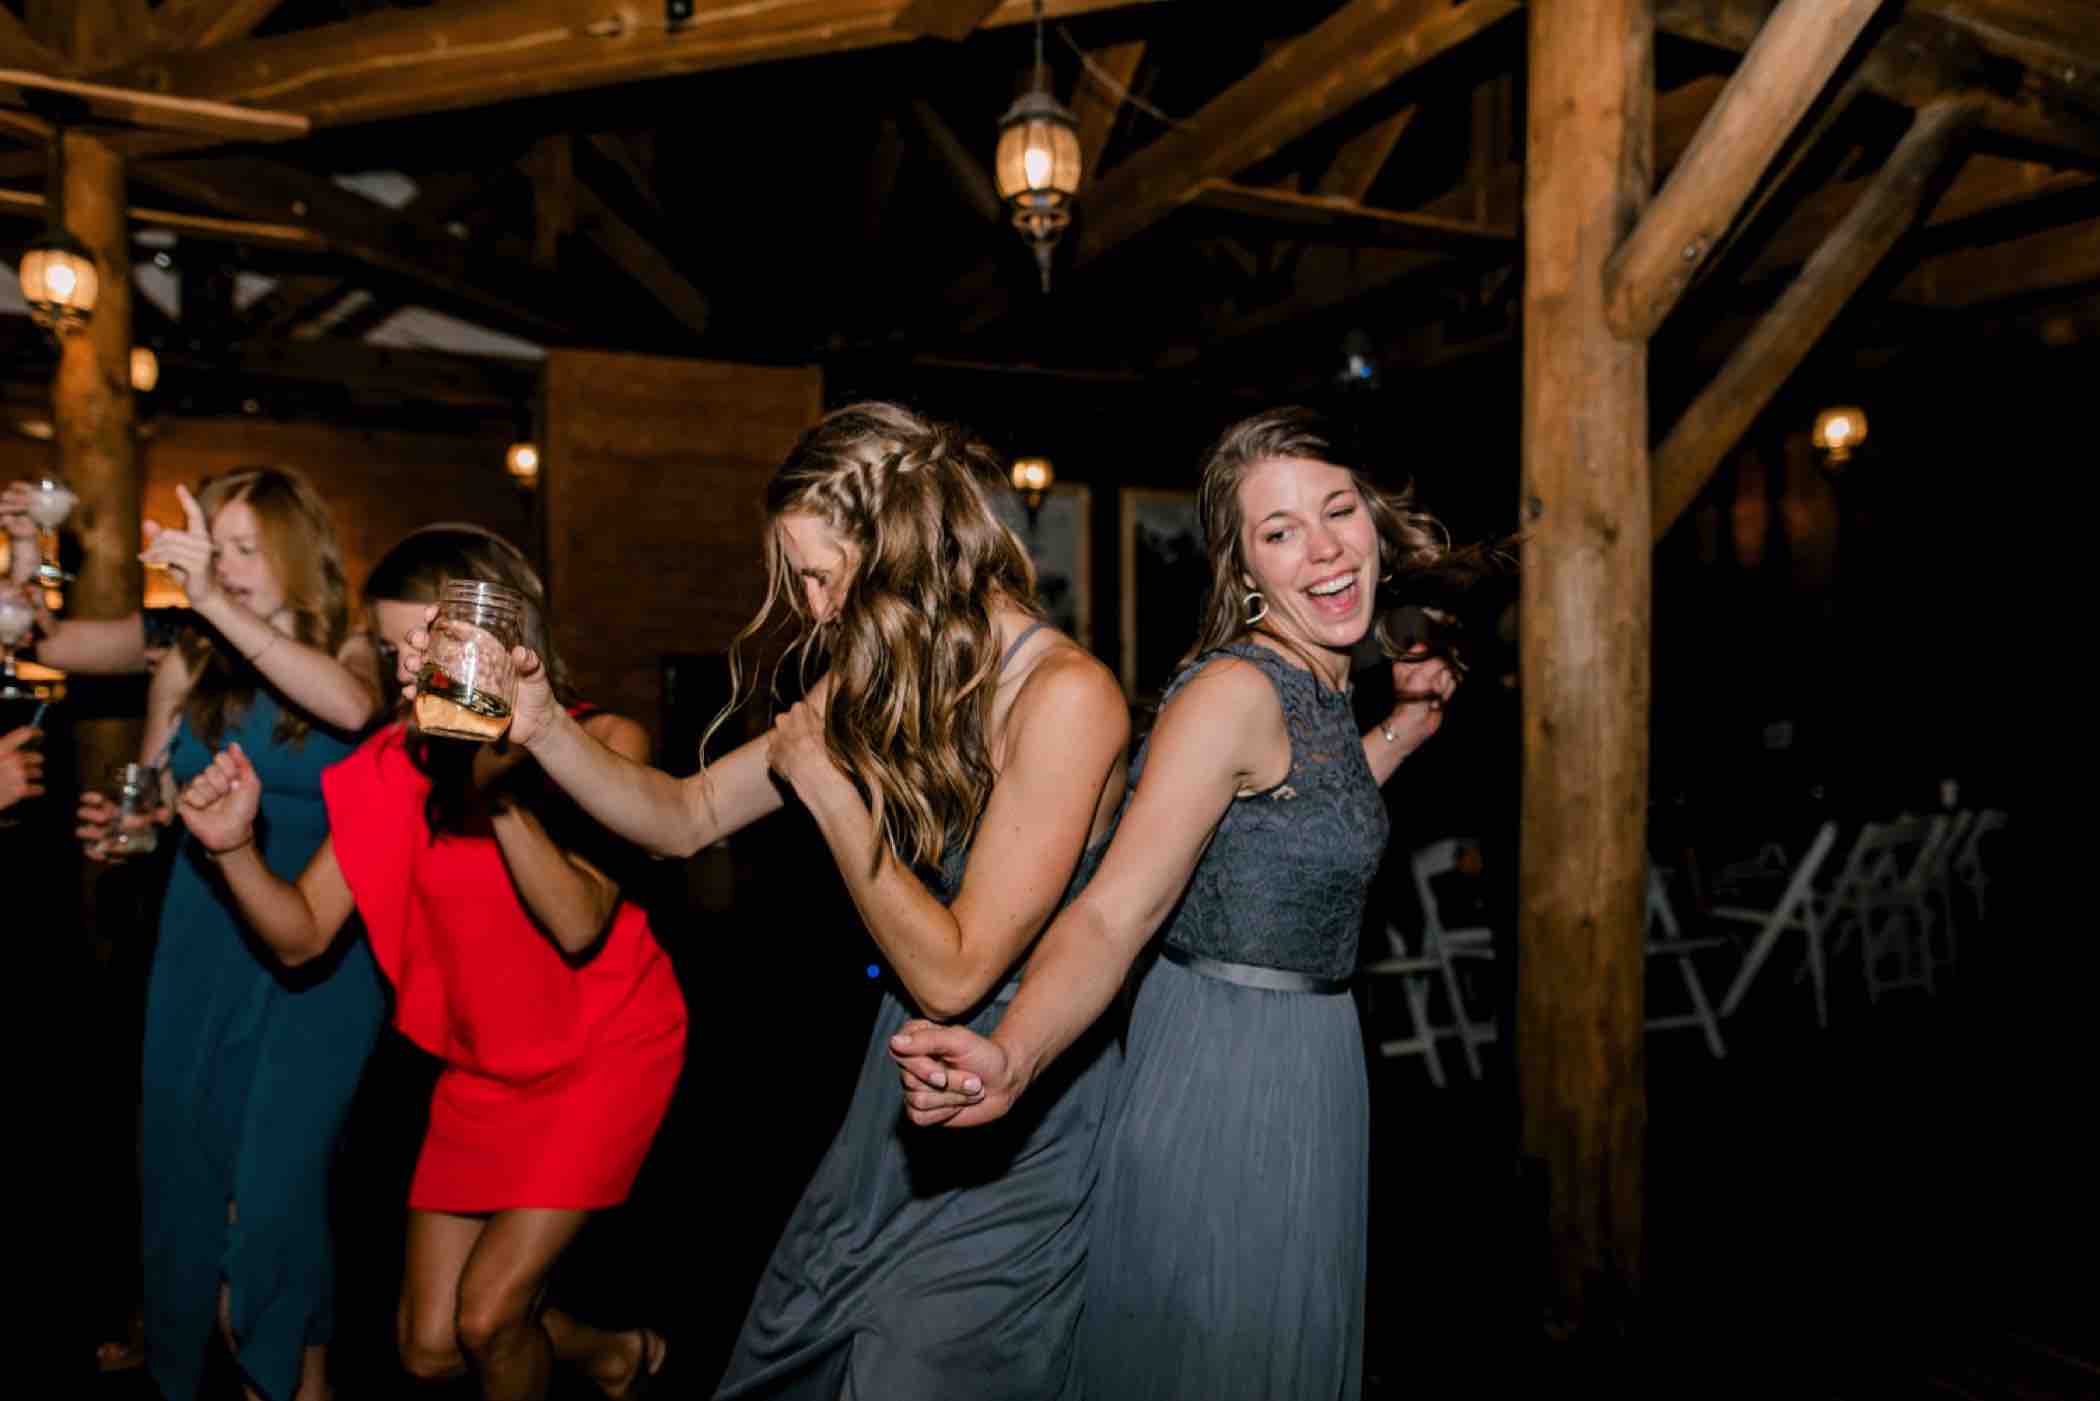 Guests dance during Kris and Sallie's wedding reception at Piney River Ranch in Vail, Colorado. Photo by Ali and Garrett, Romantic, Adventurous, Nostalgic Wedding Photographers.